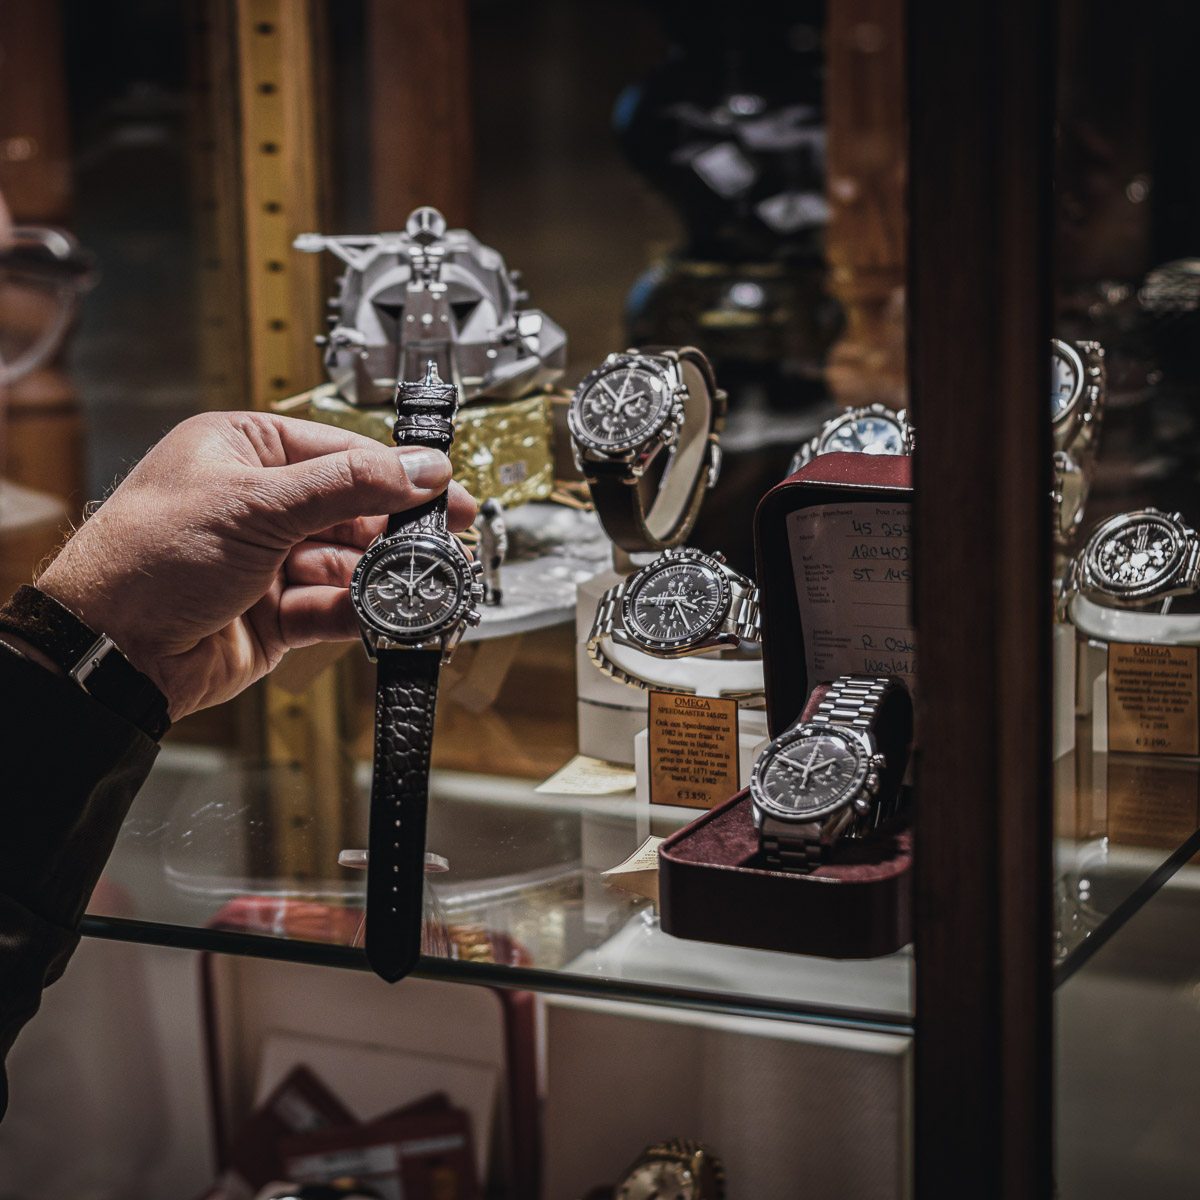 Amsterdam Watch Company is the address for vintage watches